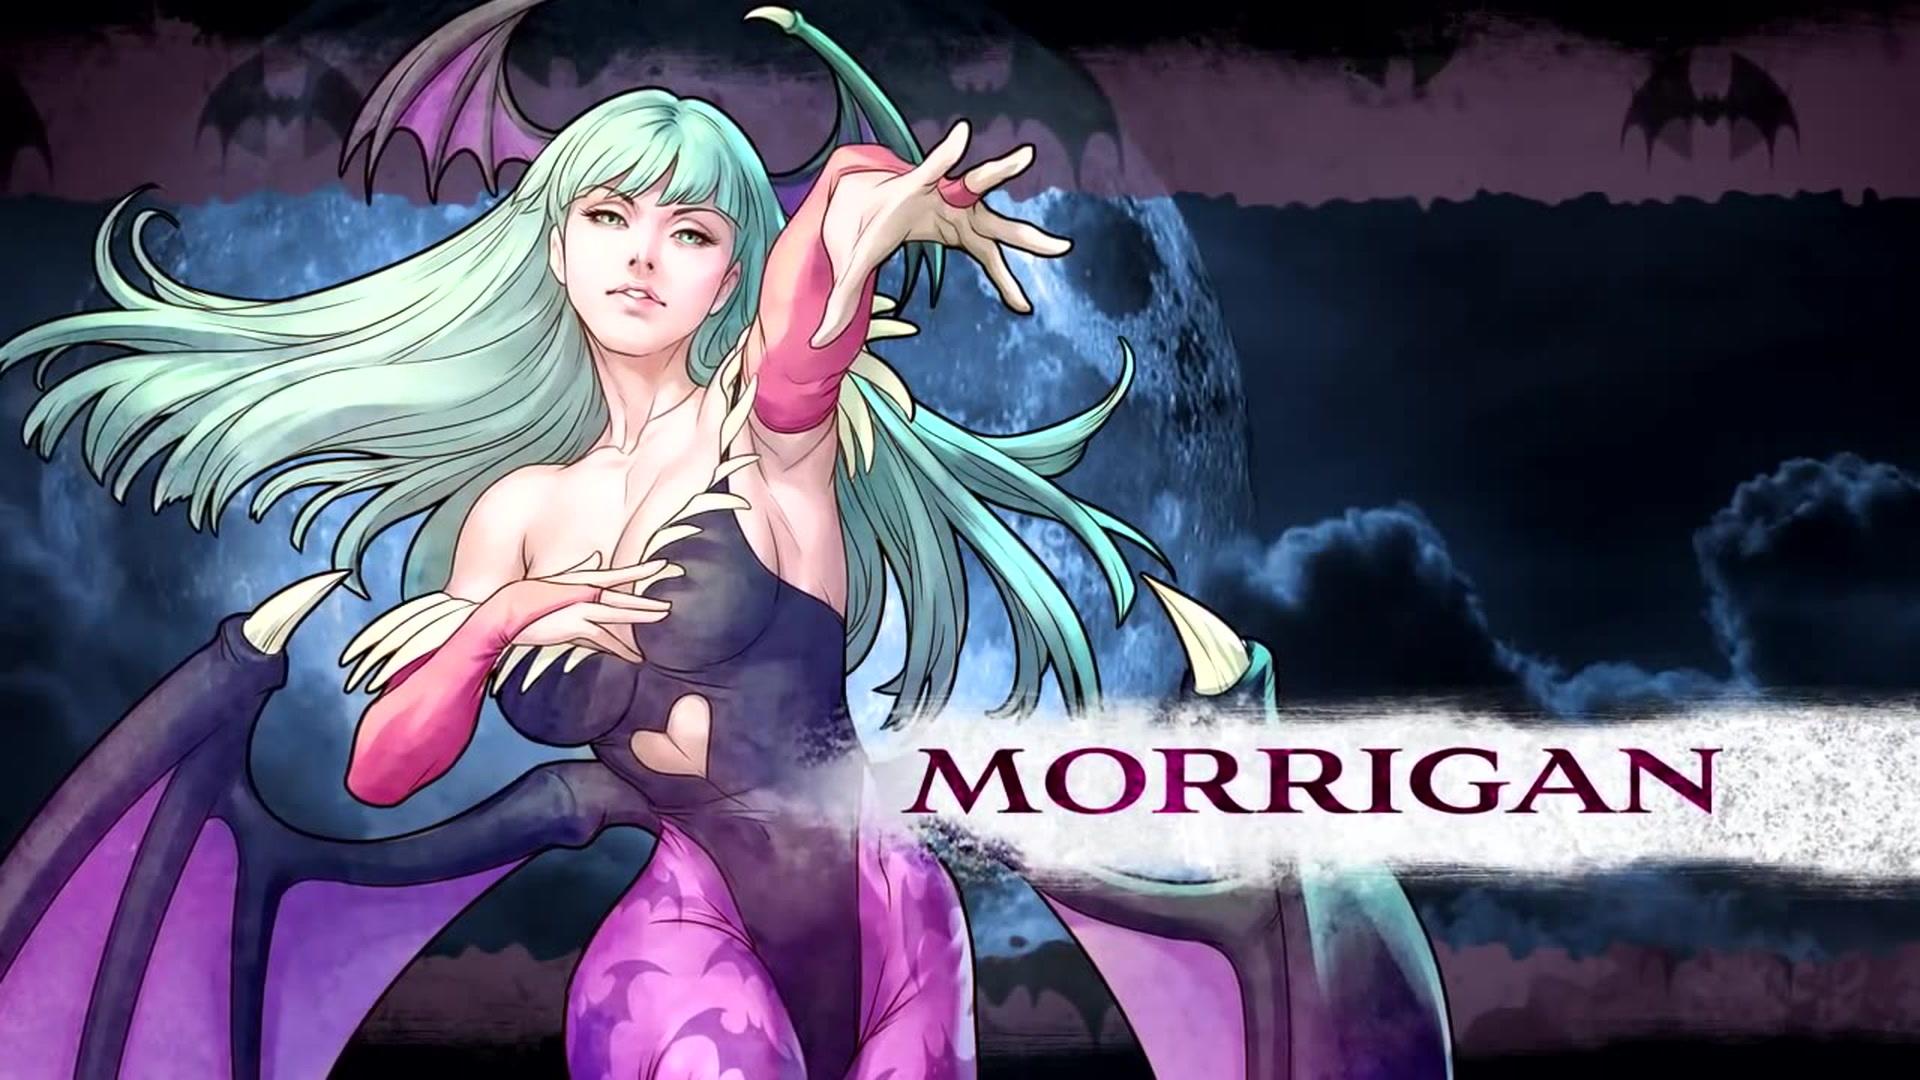 Morrigan anal doggy fucked animation wsound fan image